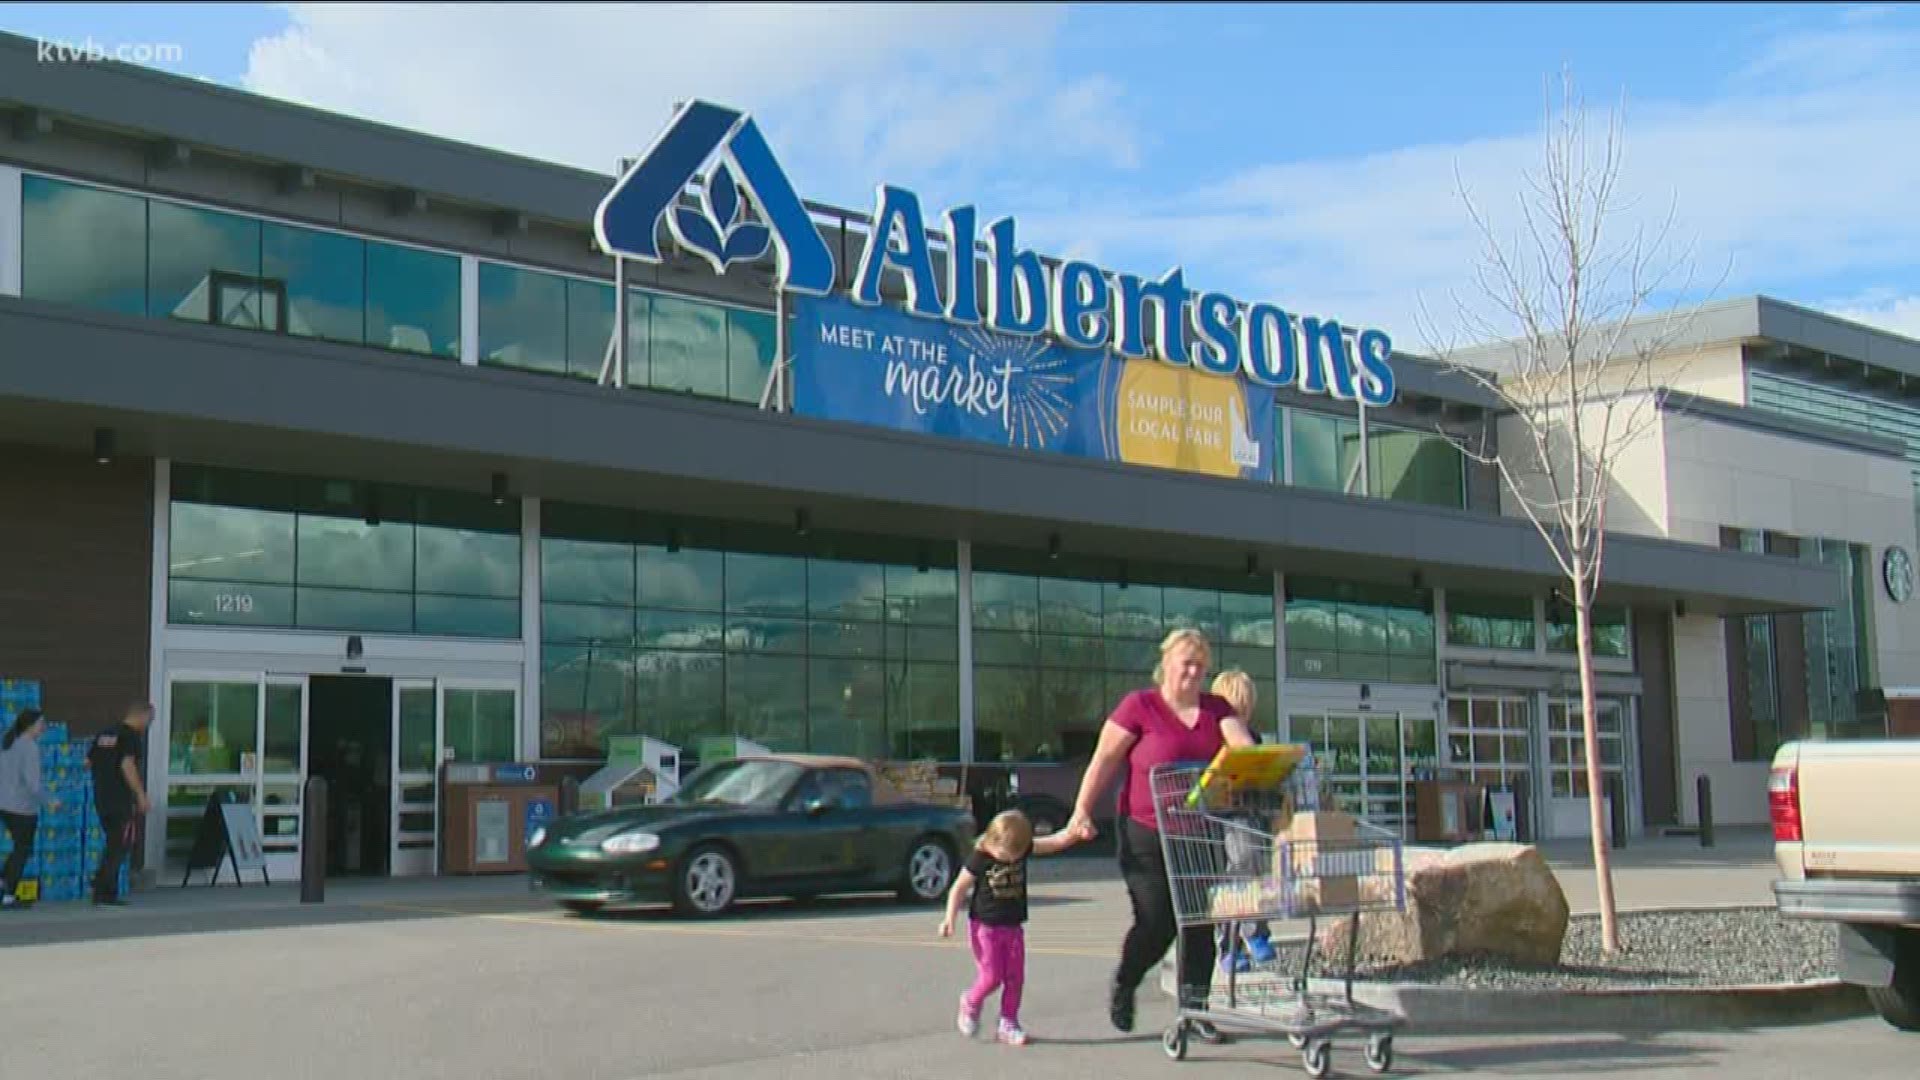 Albertsons joins a growing list of U.S. retailers that now mandate wearing face coverings in their stores.